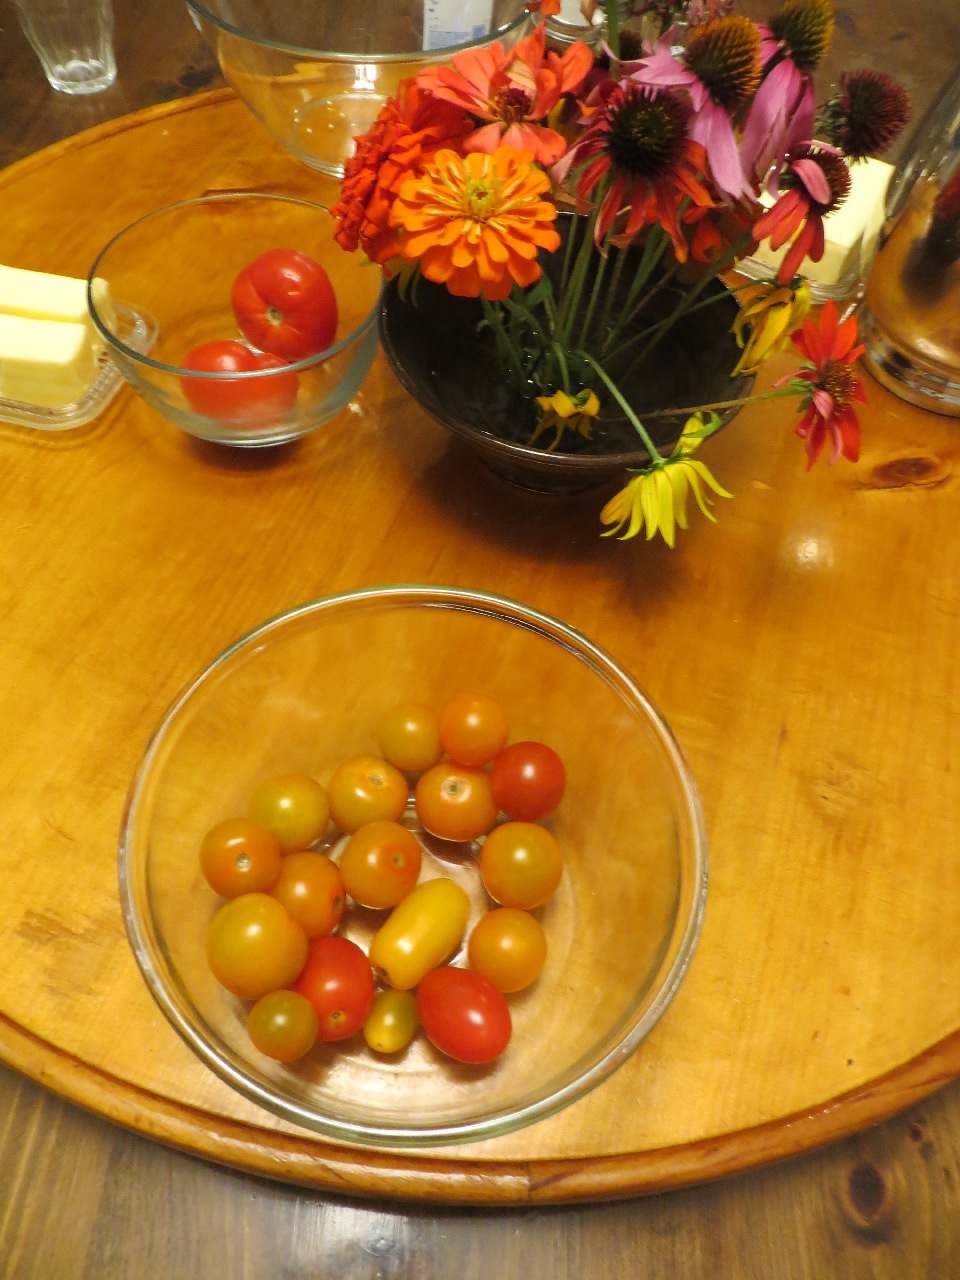 A large wooden turntable, holding an arrangement of zinnias and coneflowers, a bowl of tomatoes and one with tomatoes, also a metal water pitcher and a dish of butter.